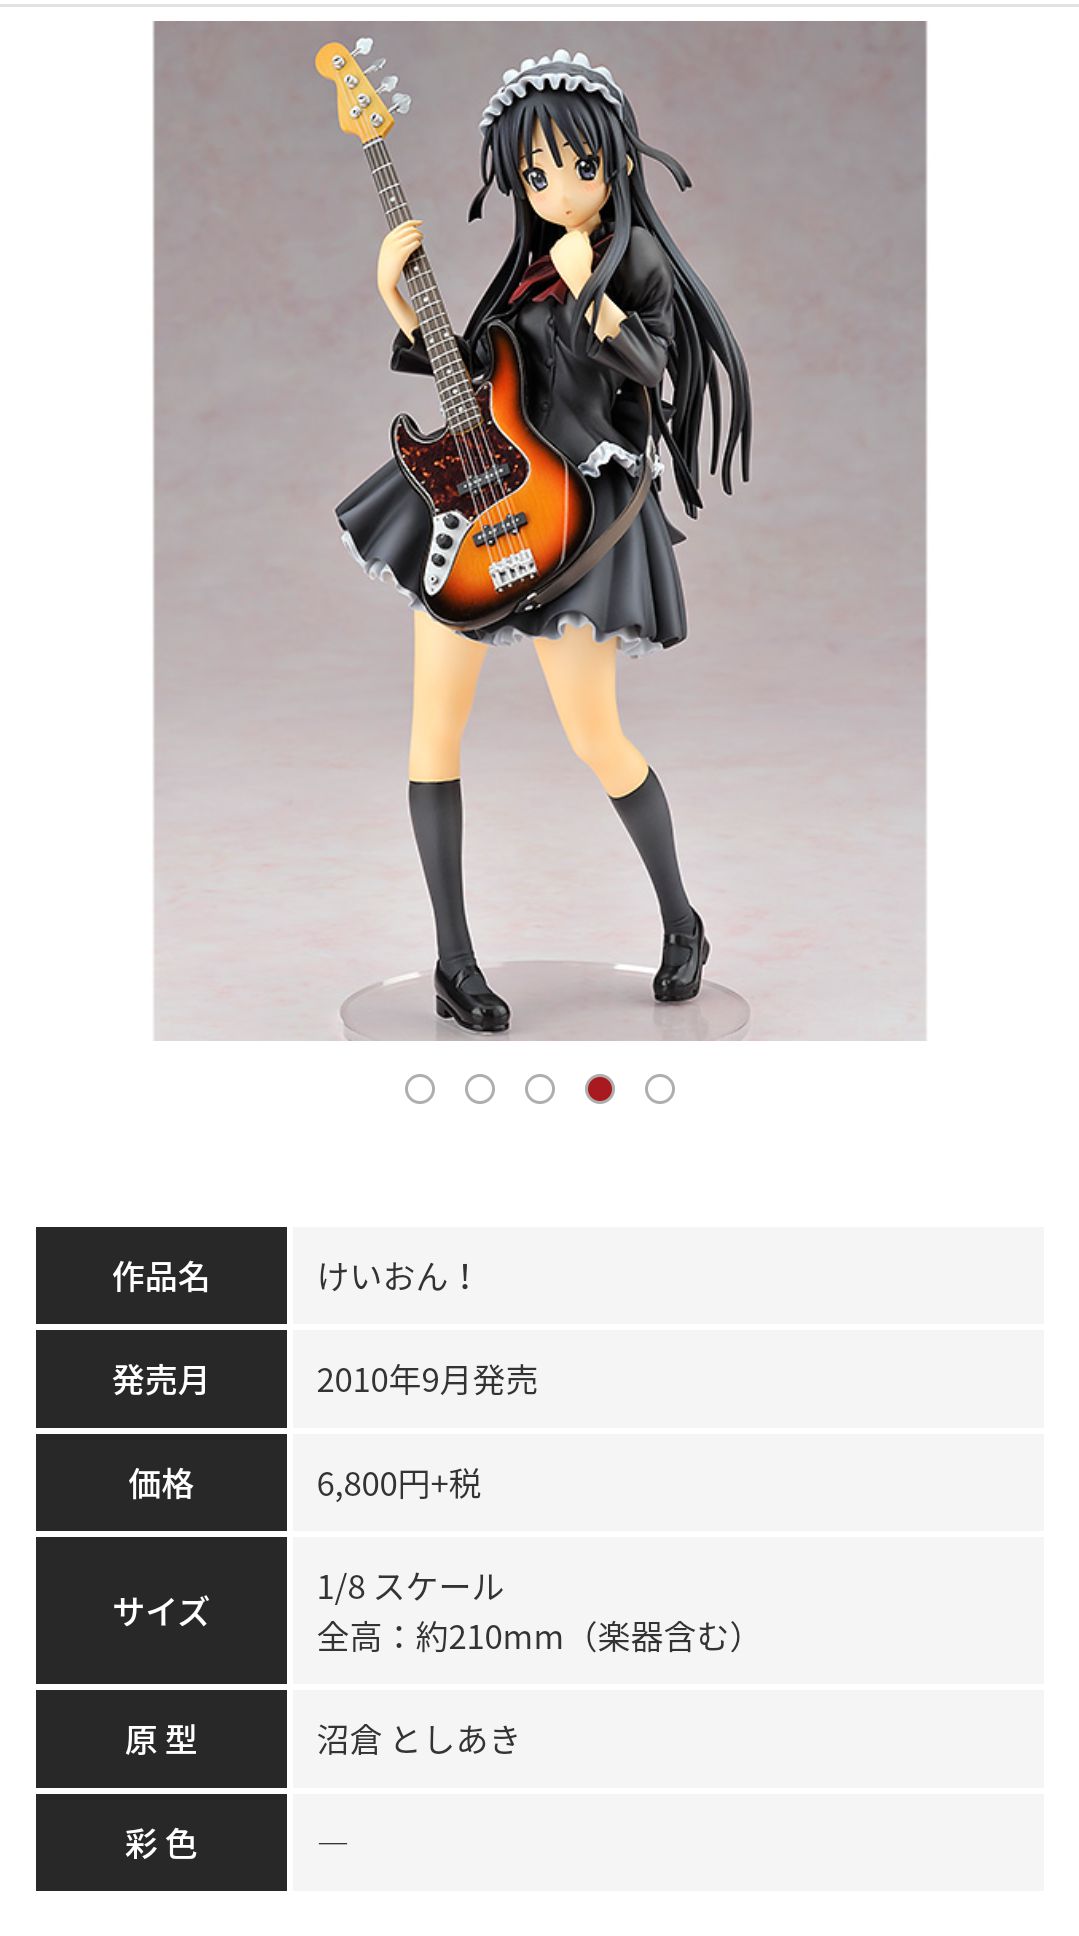 【Image】Bomber Girl's new female gaki figure, fleshed out is too real and etched 39